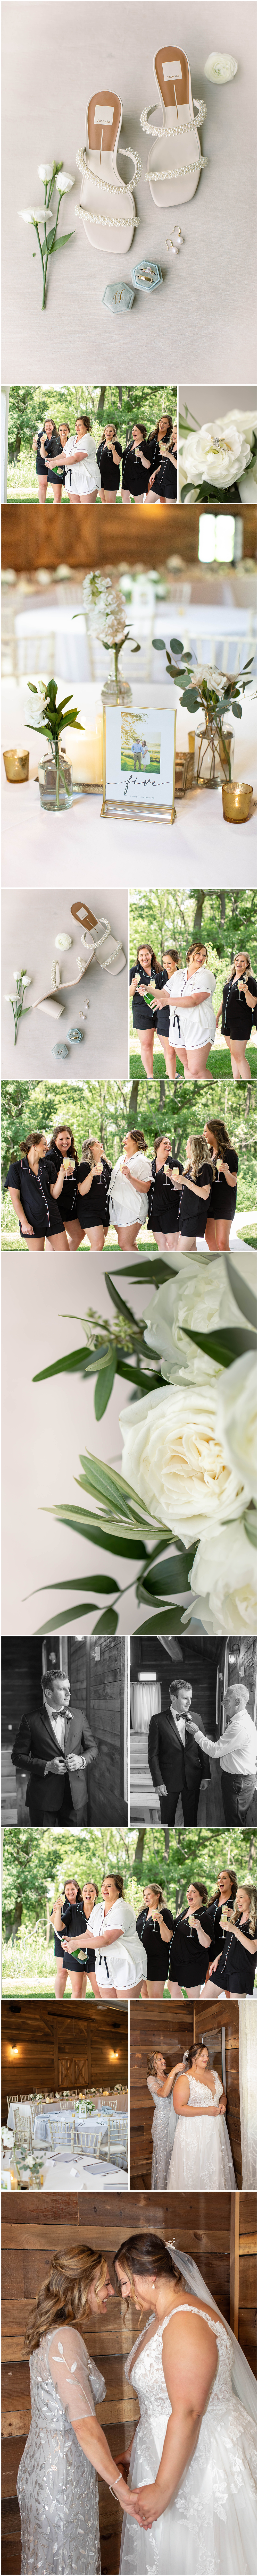 Fields Reserve Wedding Bridal Details and Getting Ready